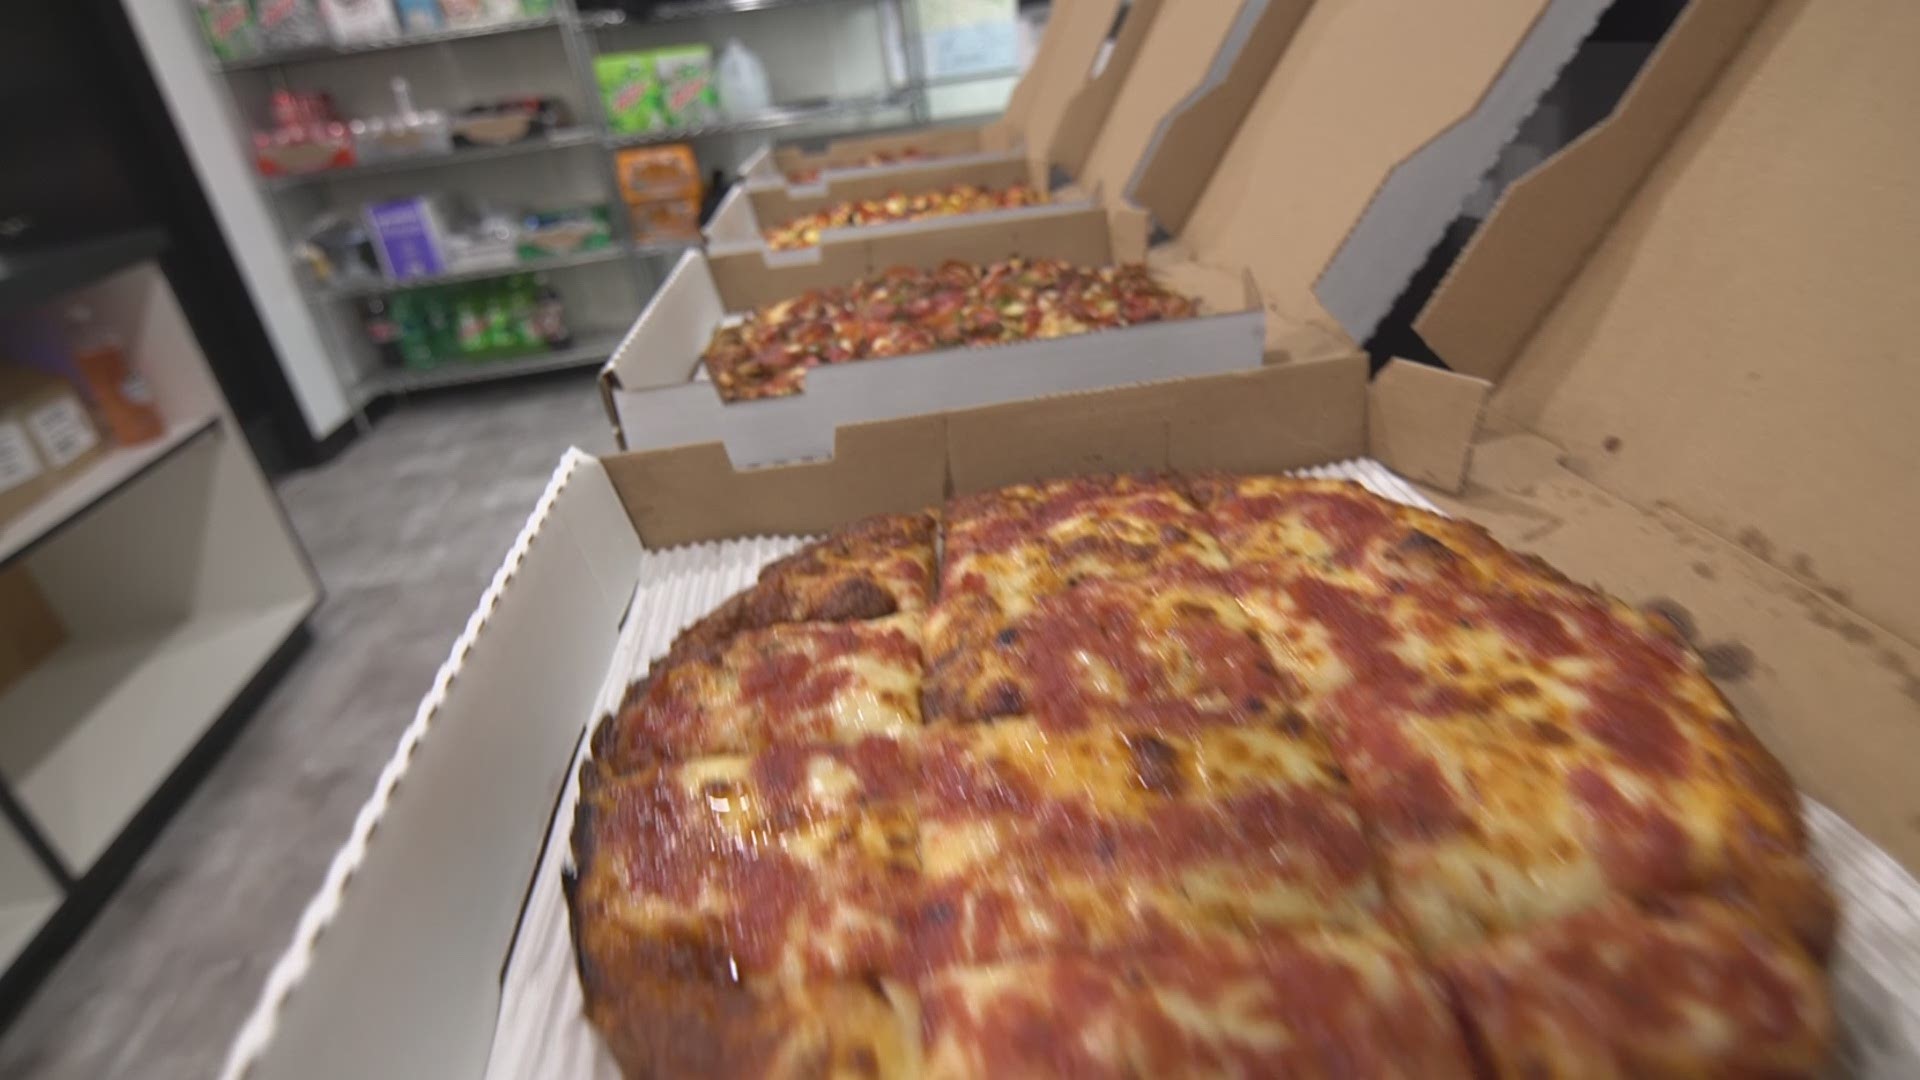 Ohio Pie Co. is a place staying true to the Buckeye state. Each pizza is made with passion and Ohio ingredients.